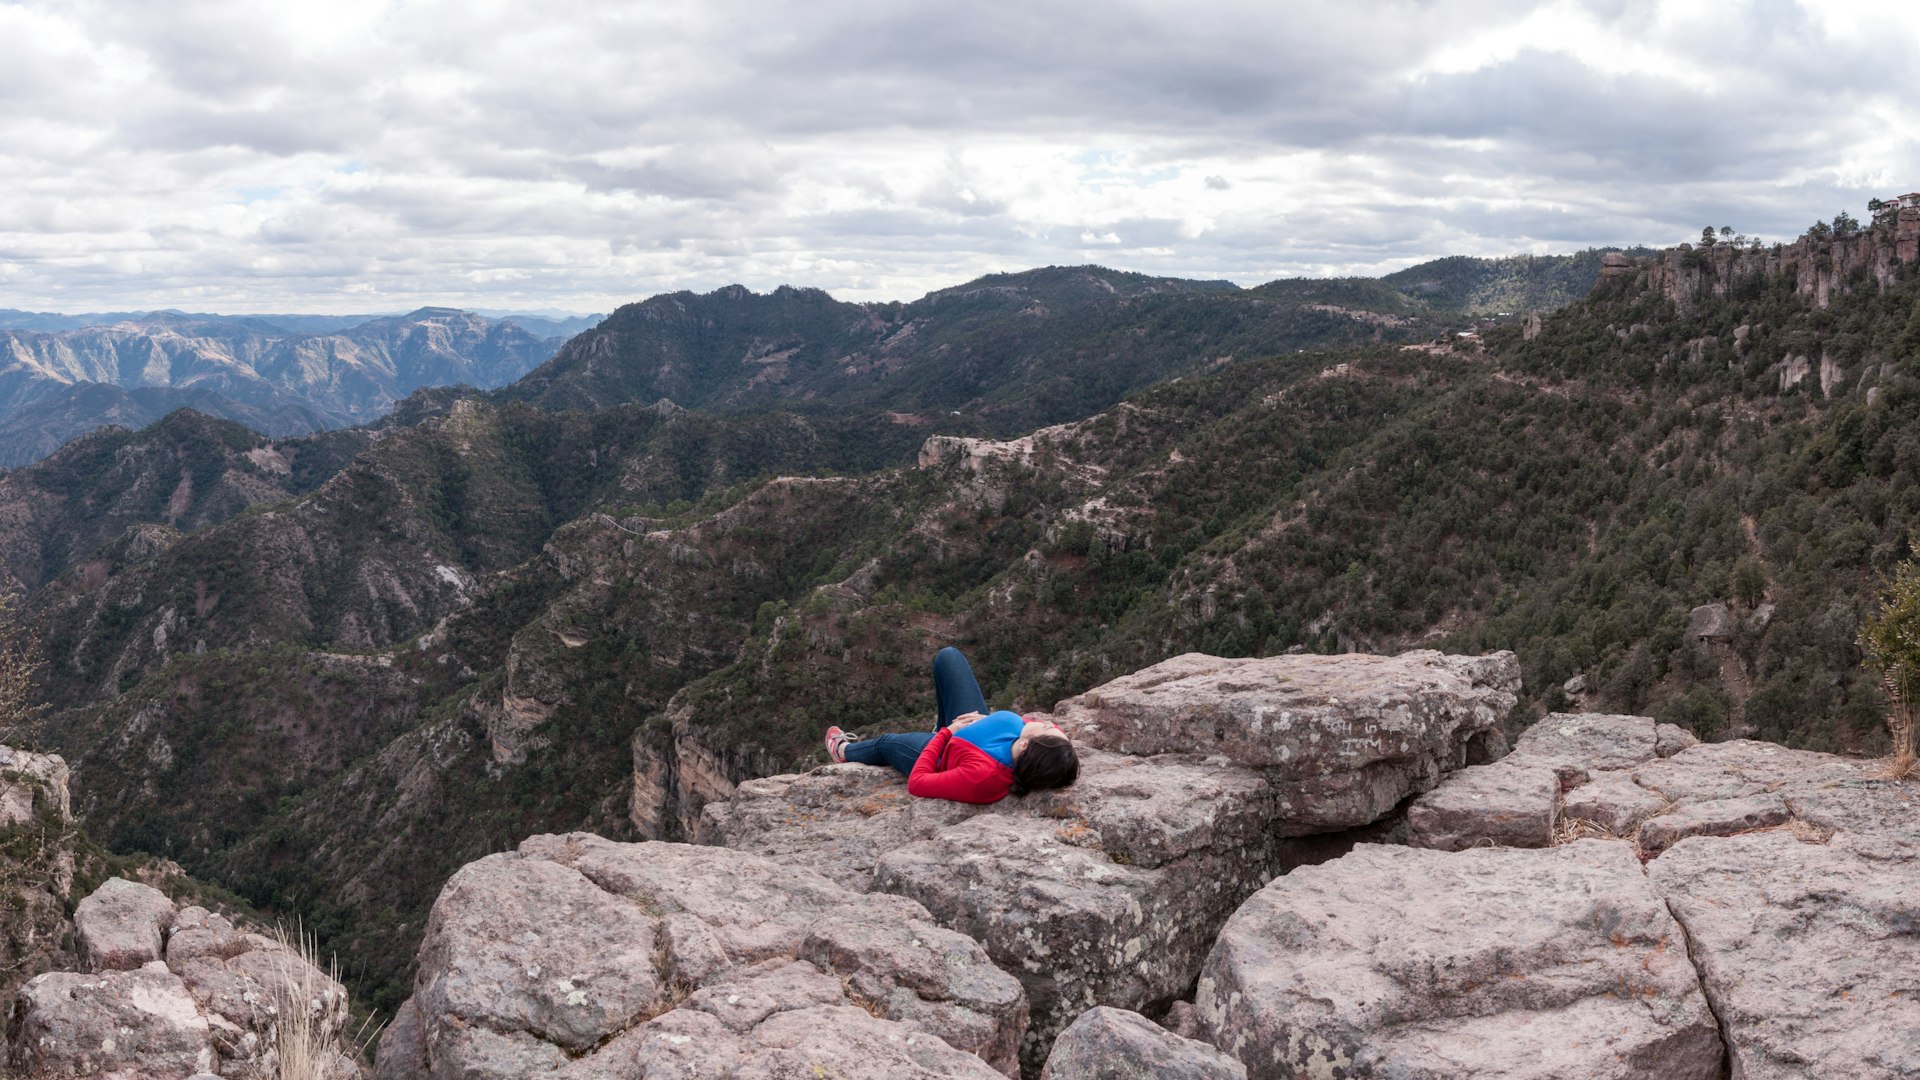 Panoramic view of the Copper Canyon at Chihuahua, Mexico